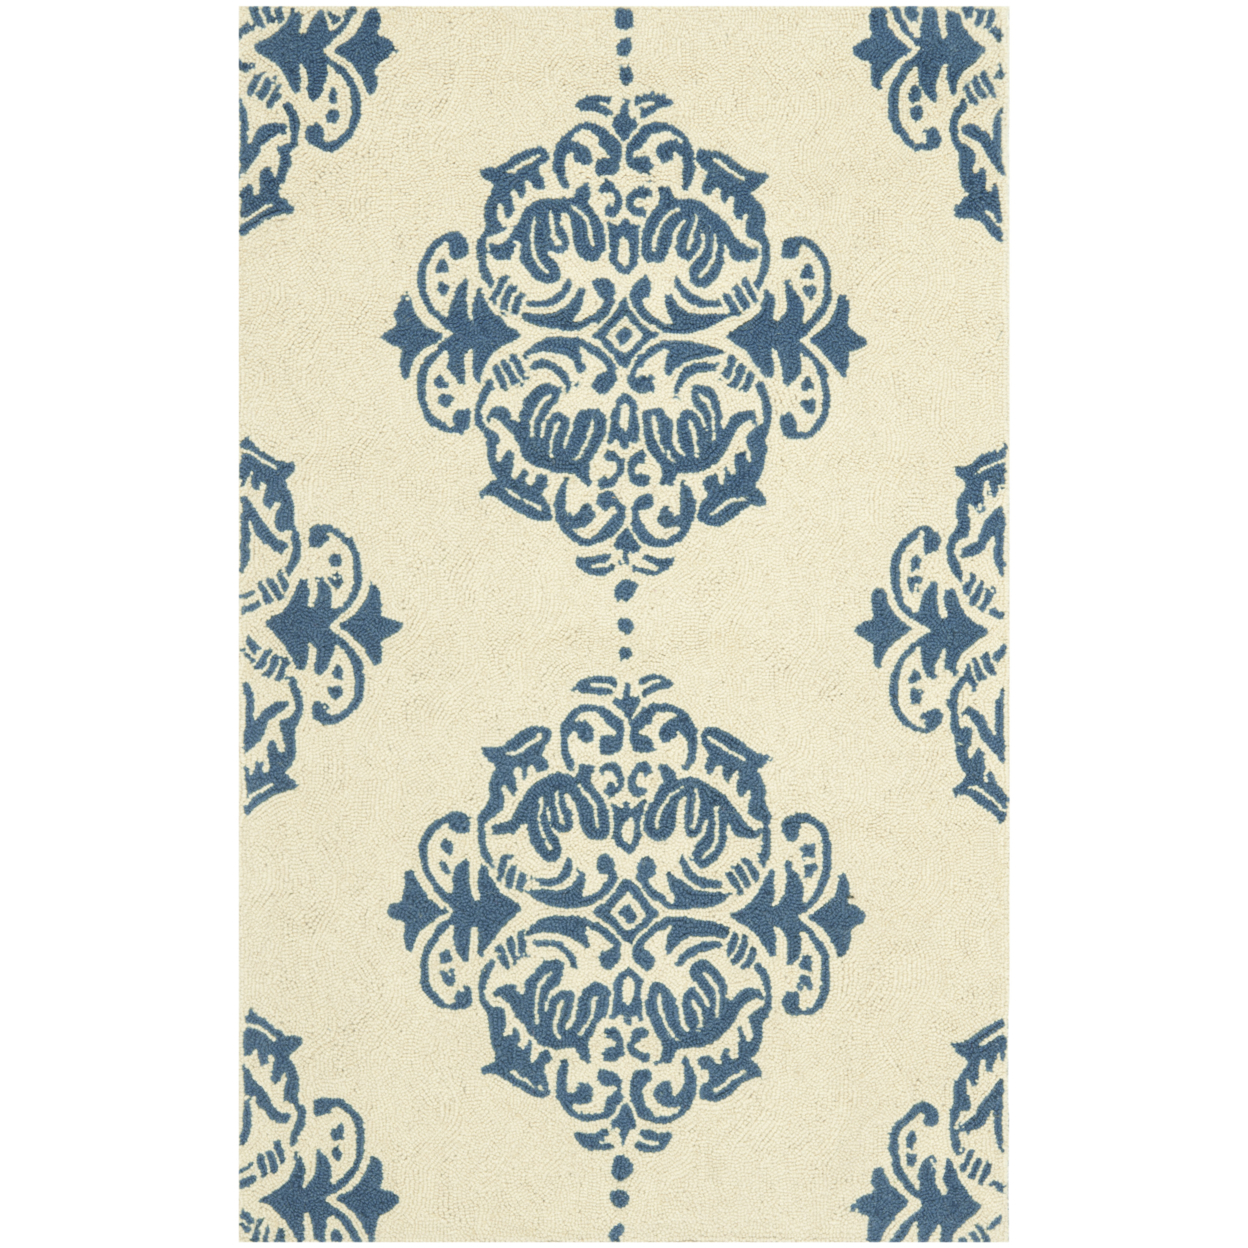 SAFAVIEH Chelsea HK145A Hand-hooked Ivory / Blue Rug - 3' Round